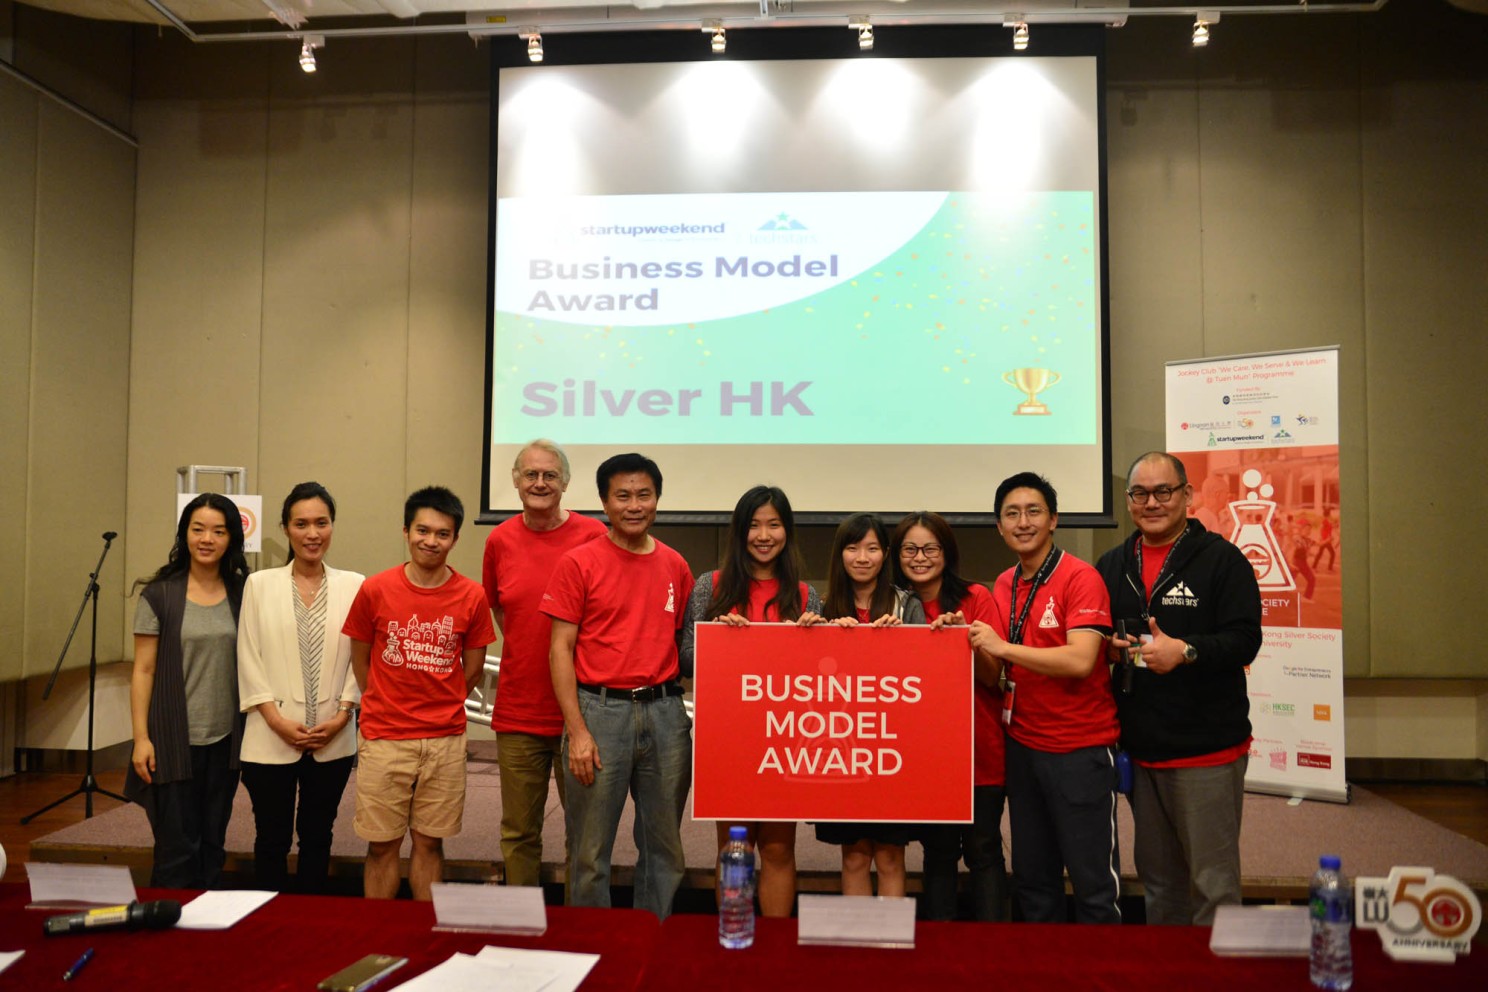 Lingnan University organises startup competition to tackle the issue of ageing population